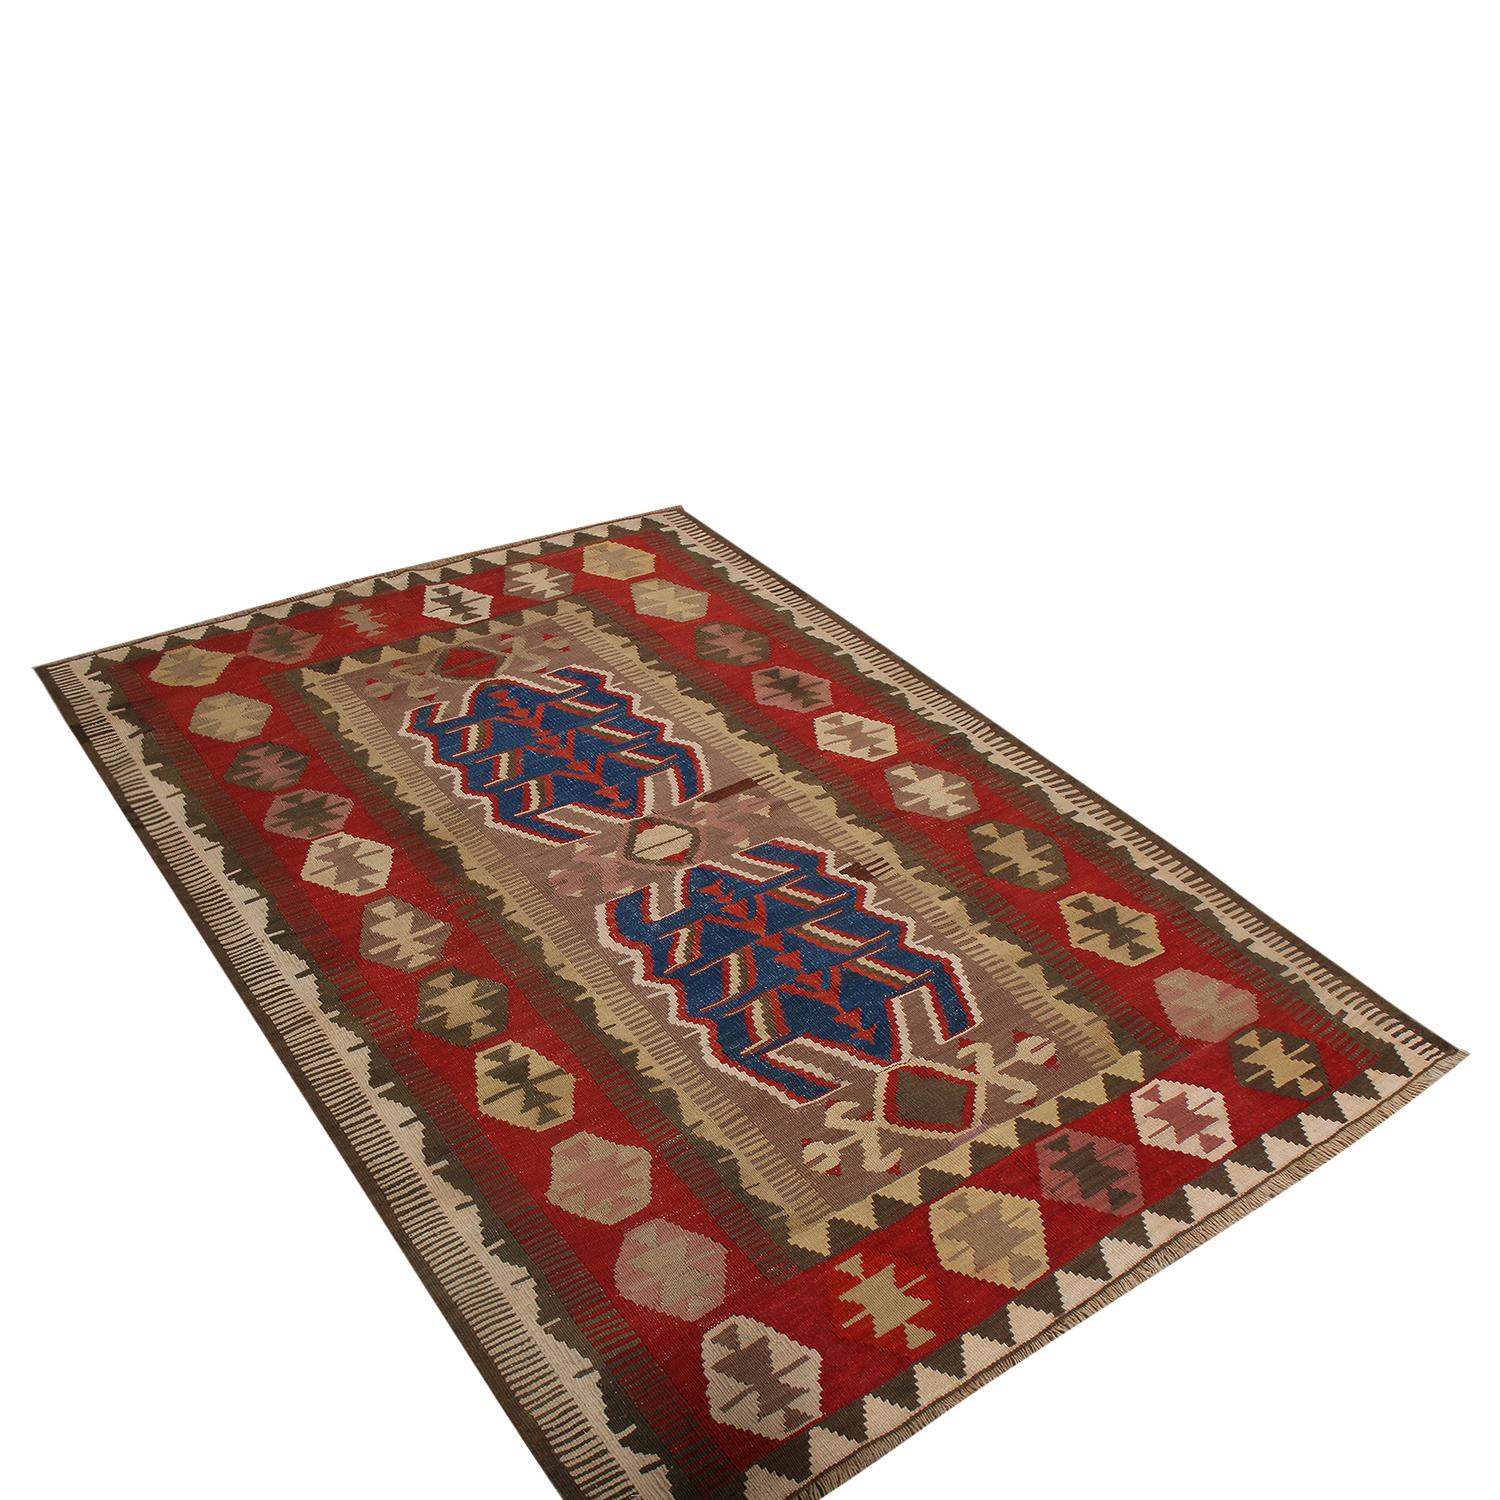 Flat-woven in Turkey originating between 1950-1960, this vintage midcentury wool Kilim hails from the city of Obruk, enjoying rich and warm colorway variations between the beige-brown borders and the bold contrast of red and blue, accented by notes